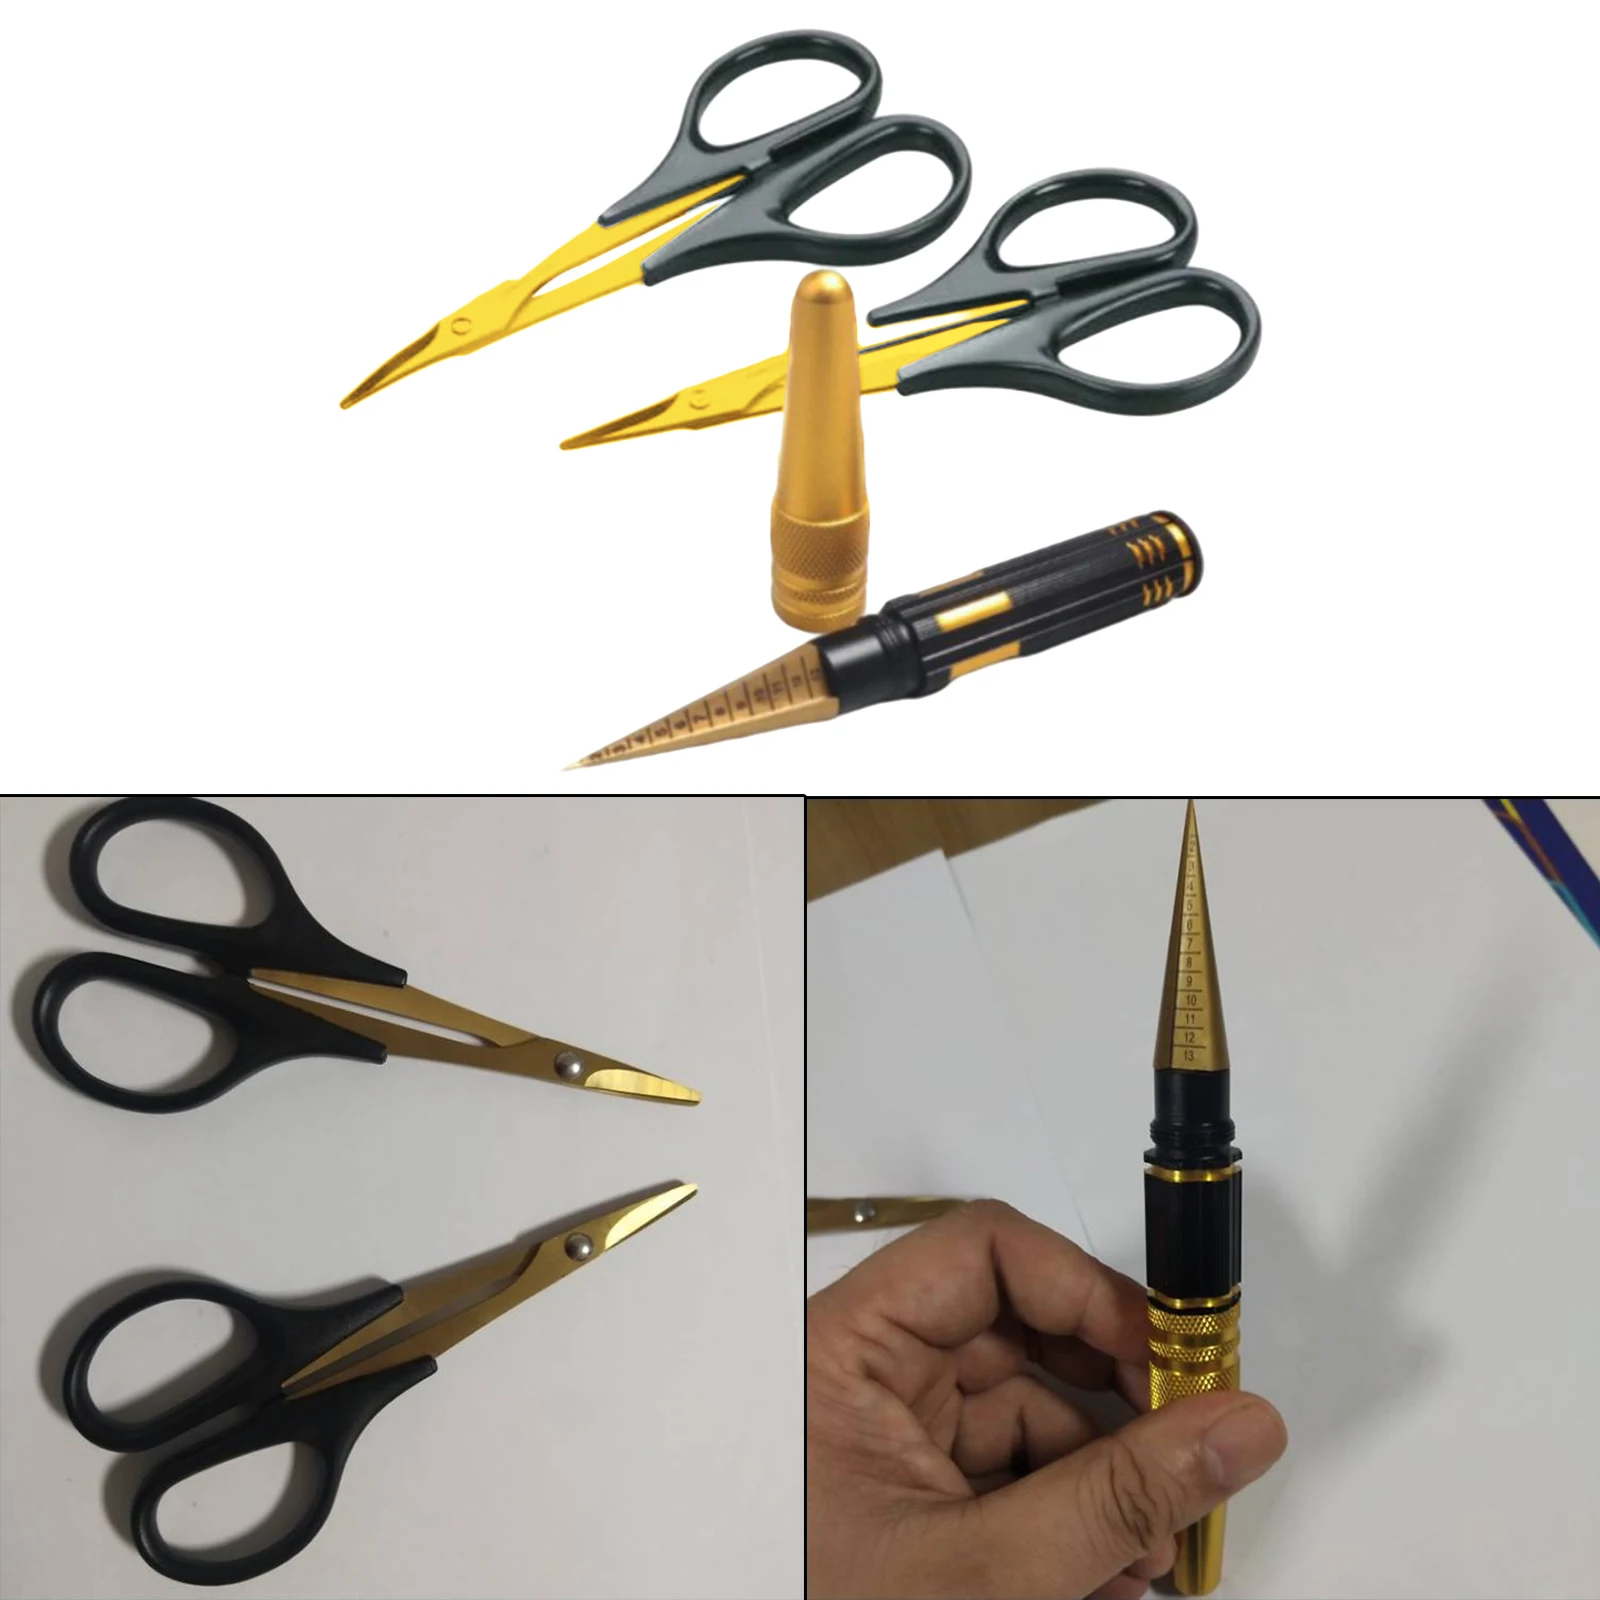 3 in 1 Portable Hole Opener Puncher Curved Scissors DIY Tool Set for RC Car Shell Repairing Accessories